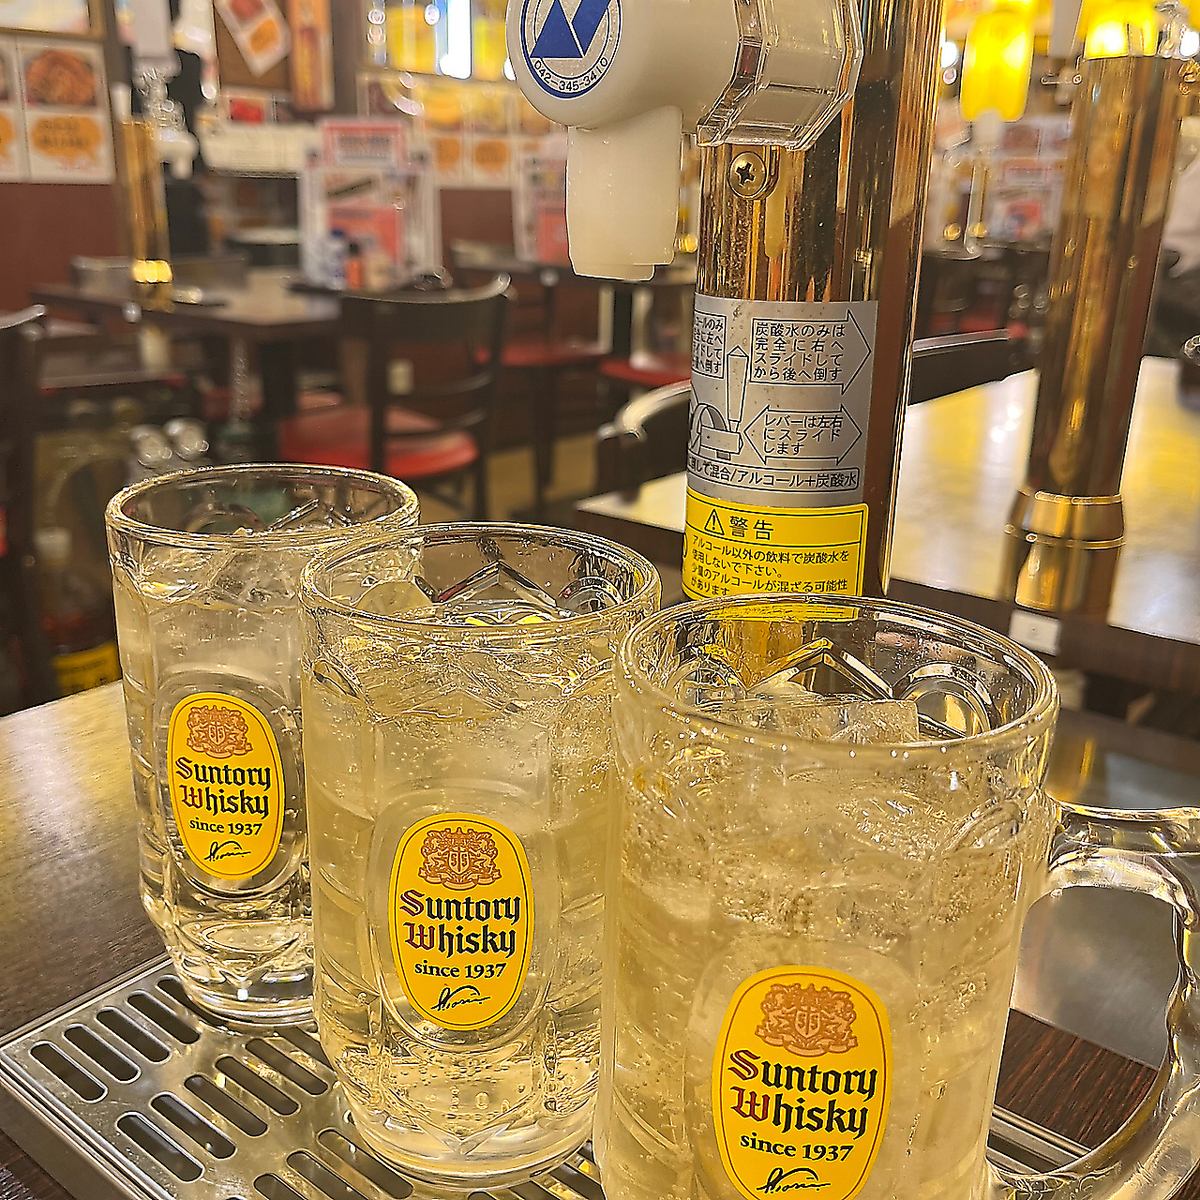 The all-you-can-drink corner highball is 0 yen for 90 minutes!